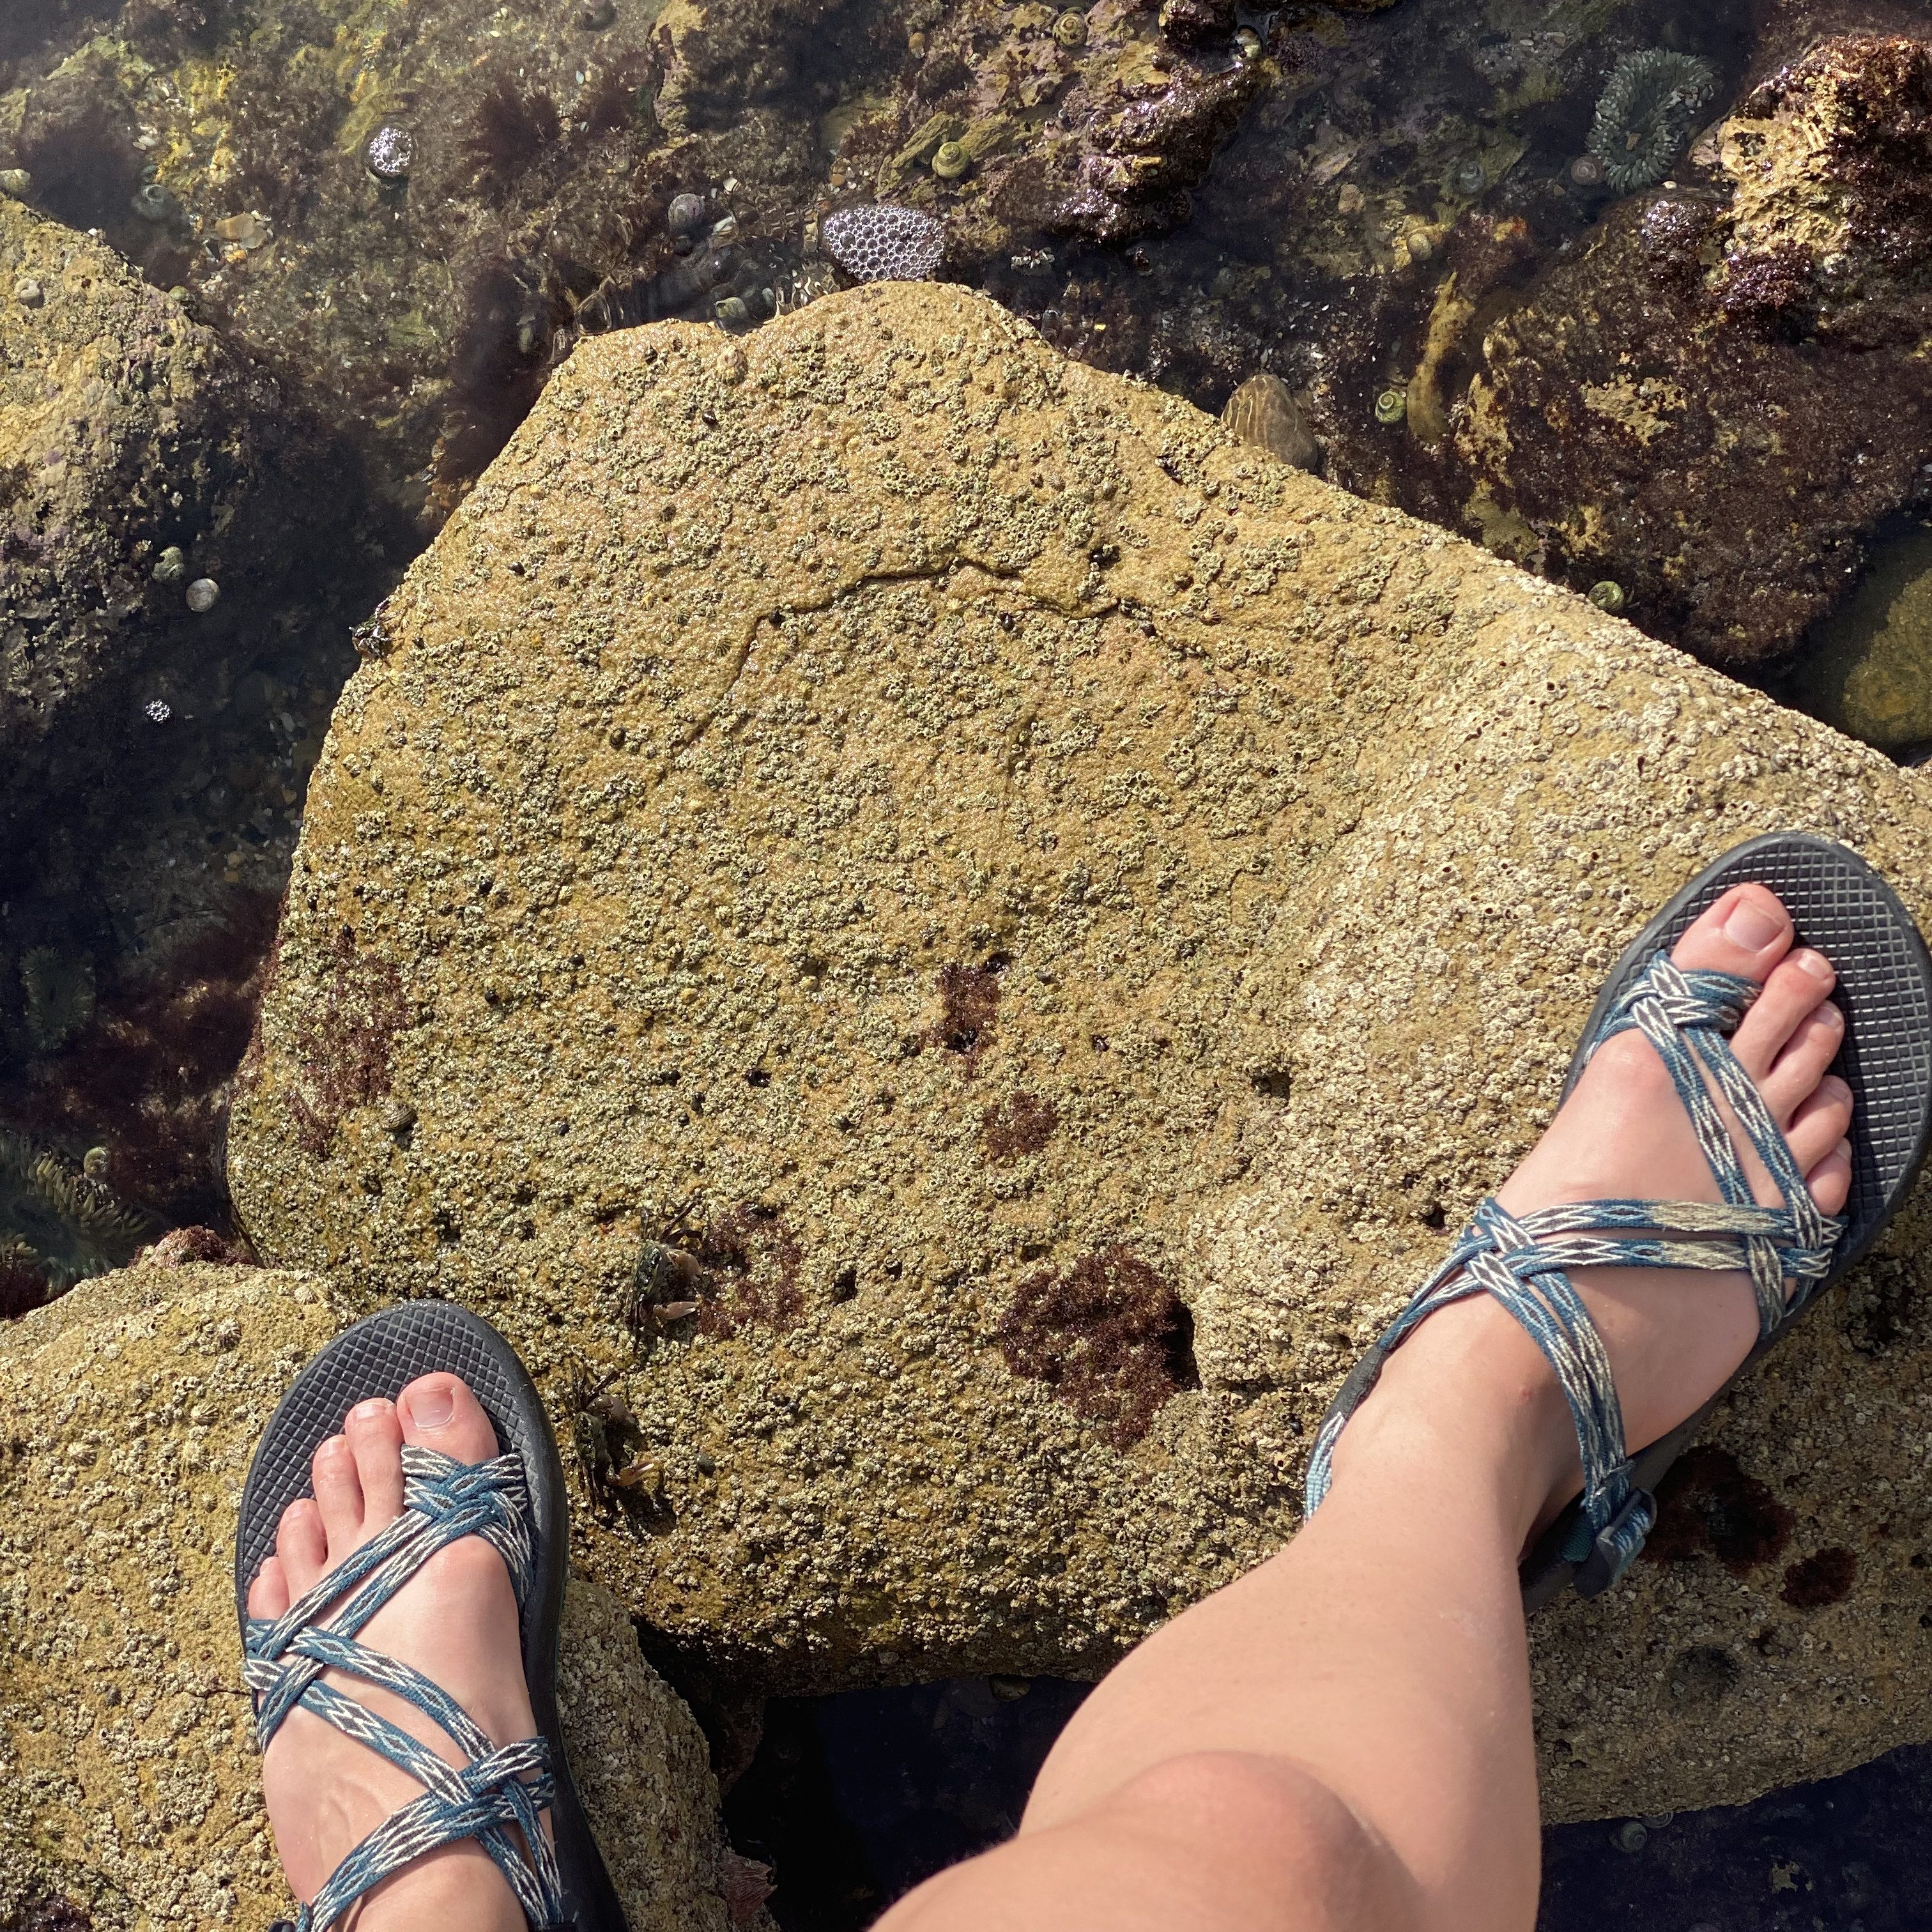 shoes for tide pooling, what shoes to wear at the tide pools, chacos, sandals, sport sandals